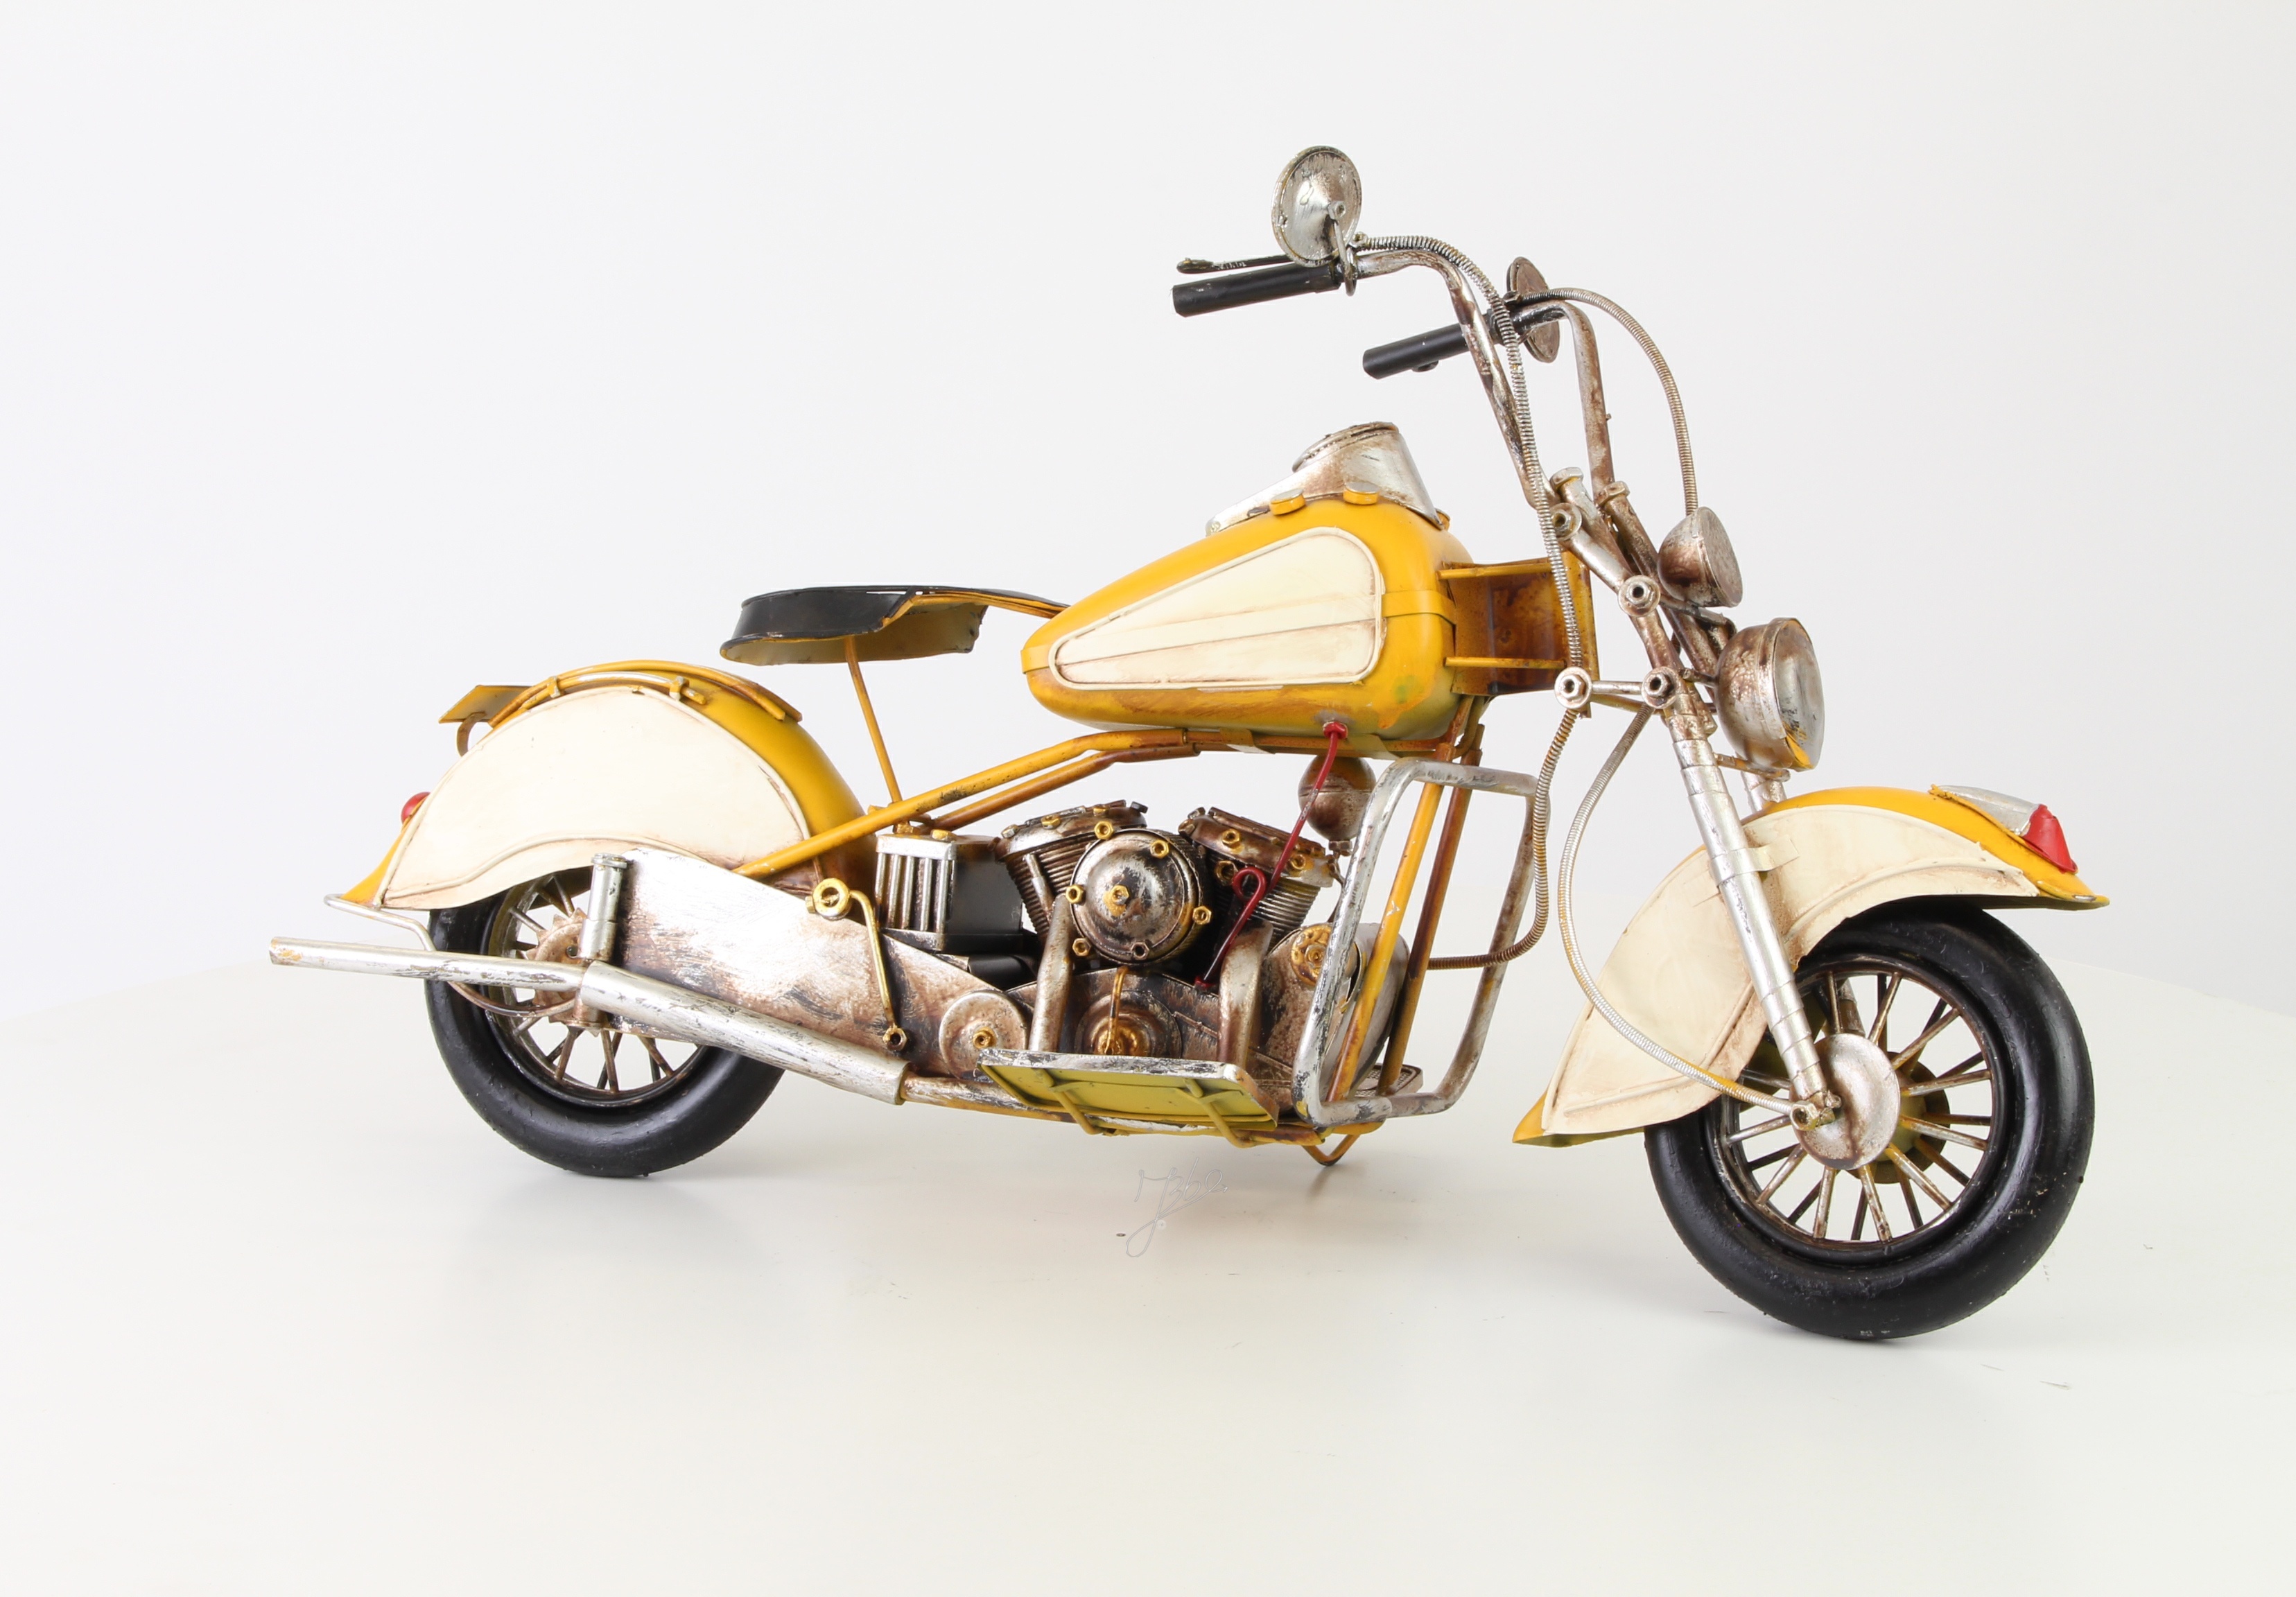 A TIN MODEL OF A MOTORCYCLE